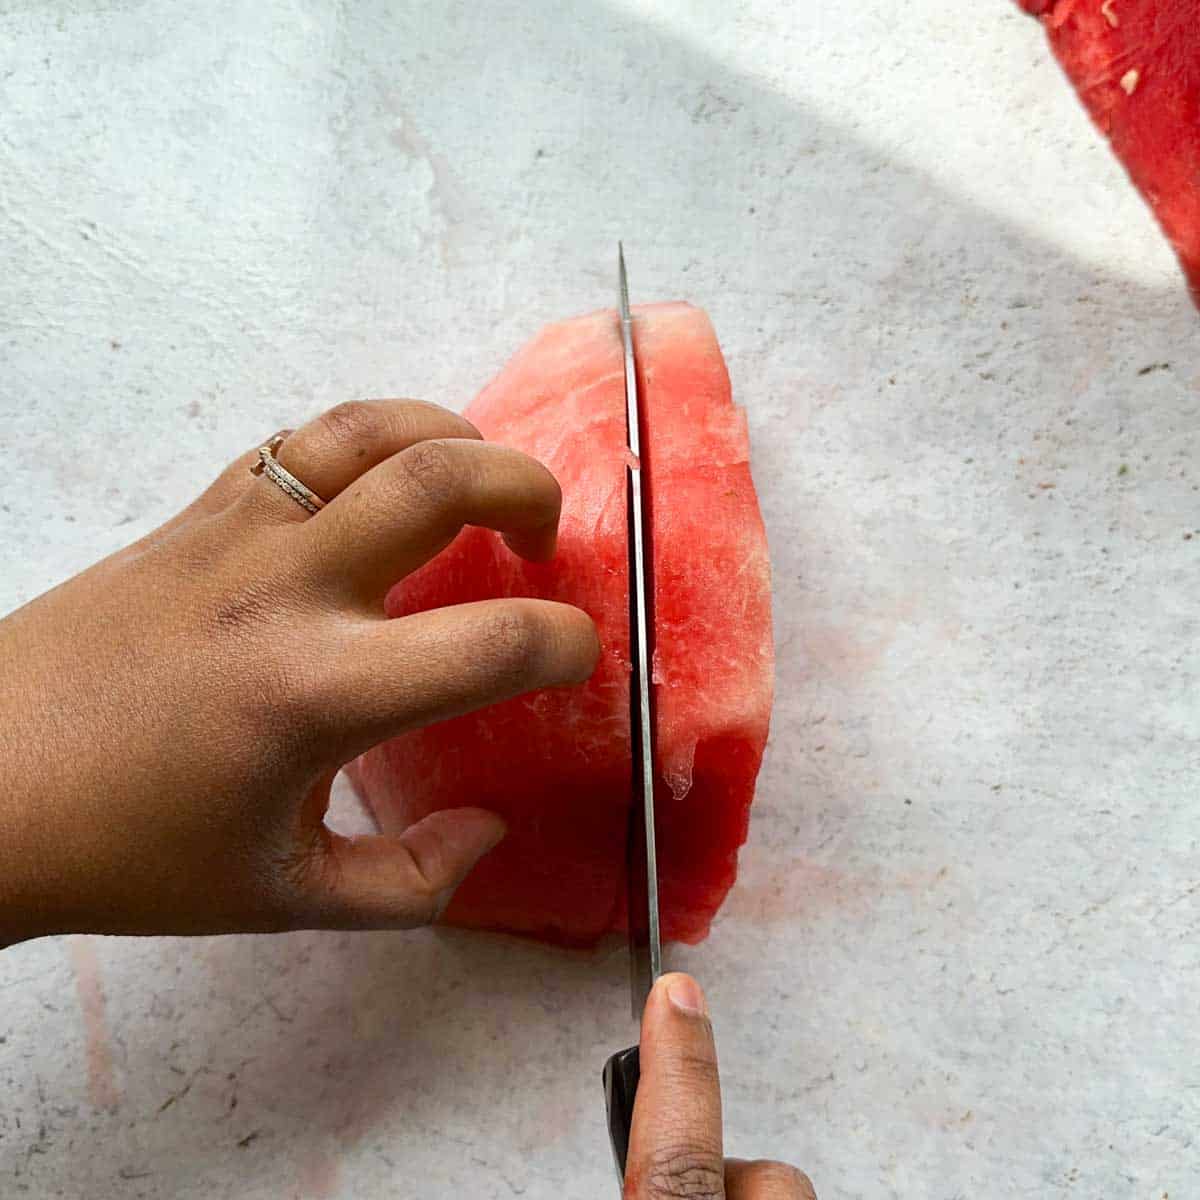 Cutting a quarter of a watermelon into 1 inch slabs